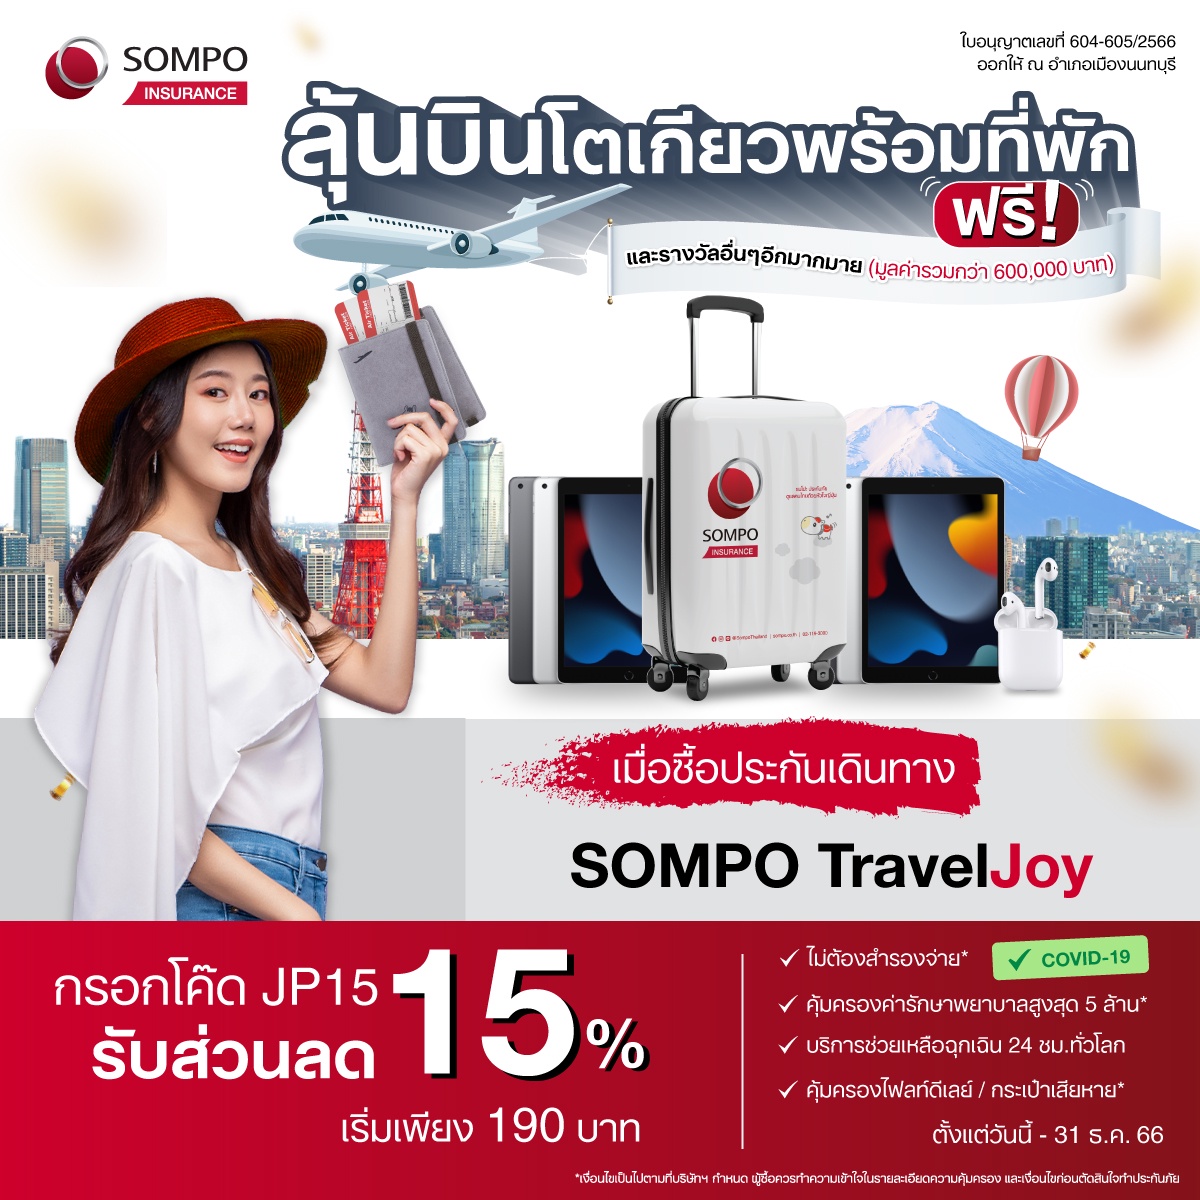 Sompo Insurance Launches Campaign 'Tiew Laew Tiaw Eek SS2' To Win Free Japan Trip